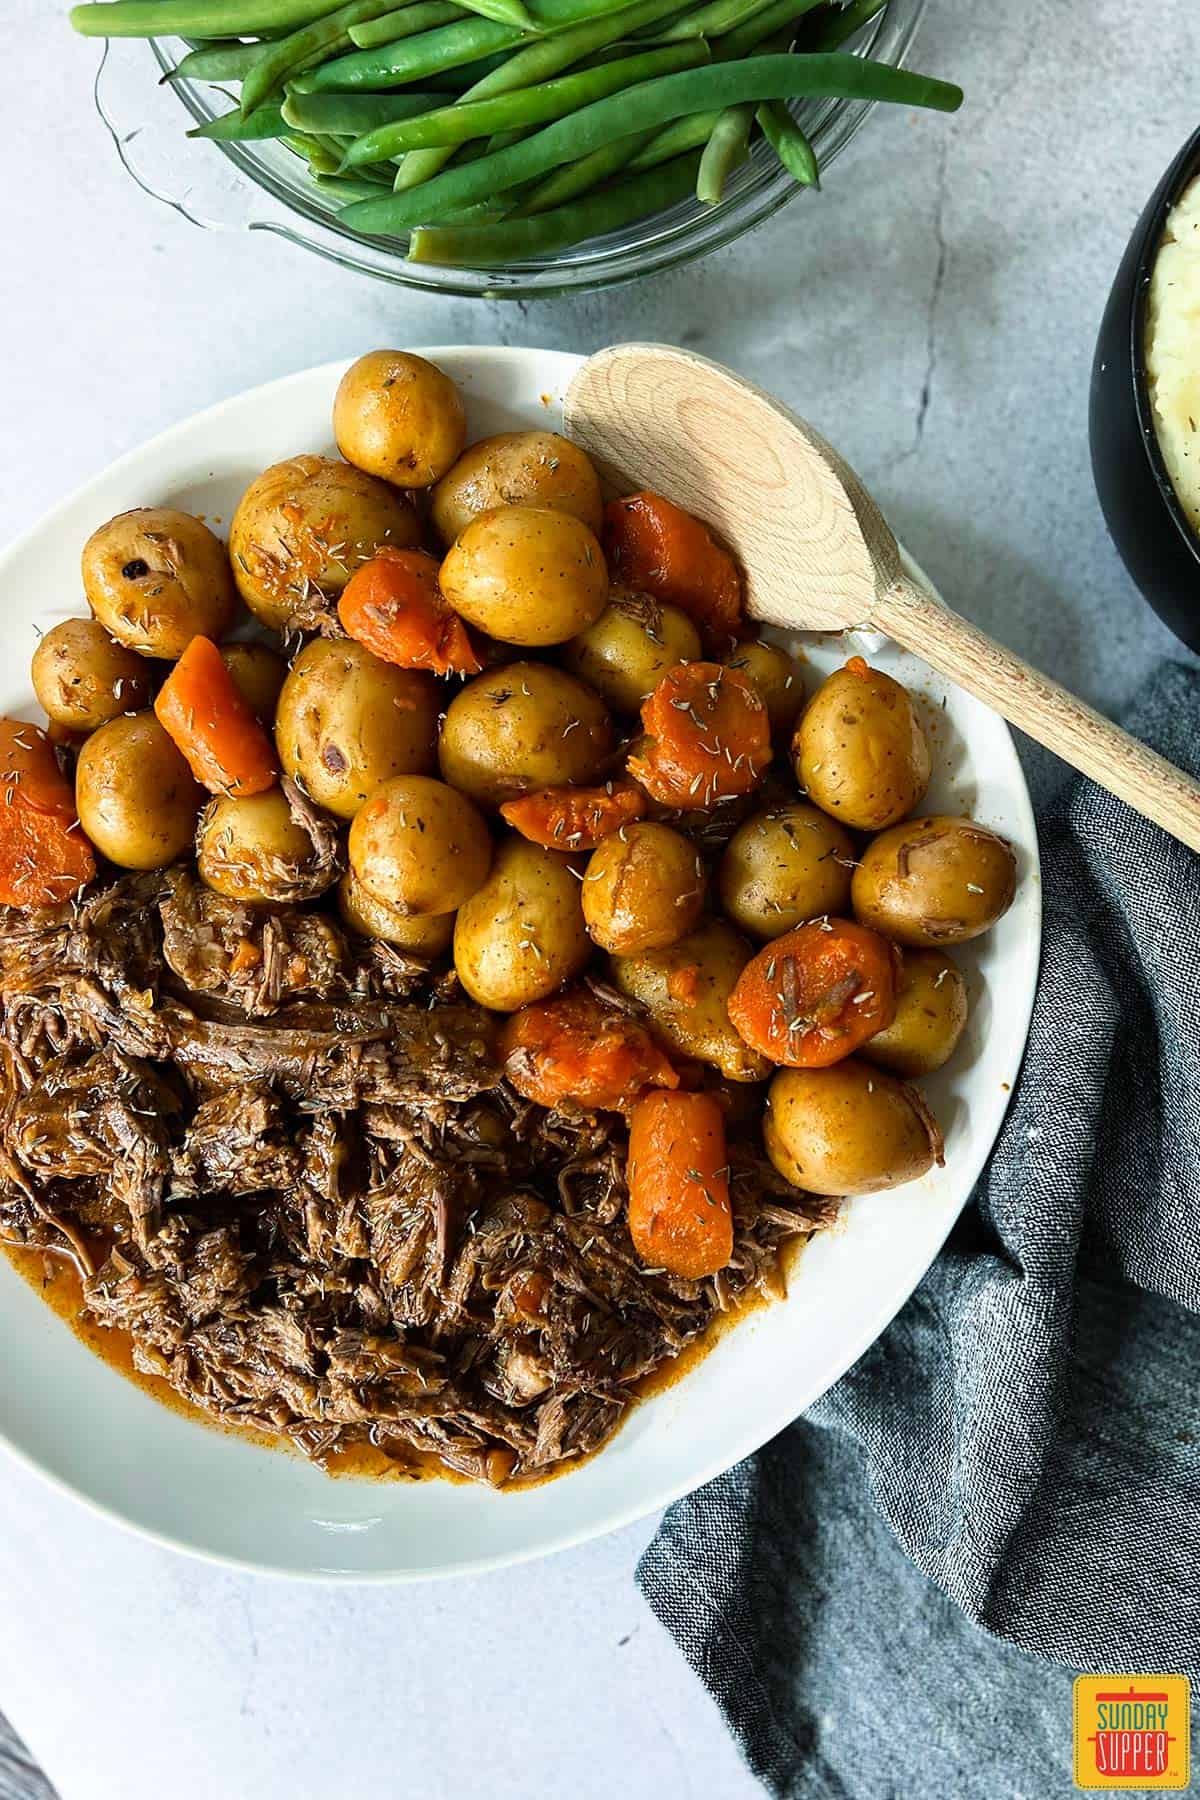 instant pot chuck roast on a plate with a wooden spoon, potatoes, and carrots